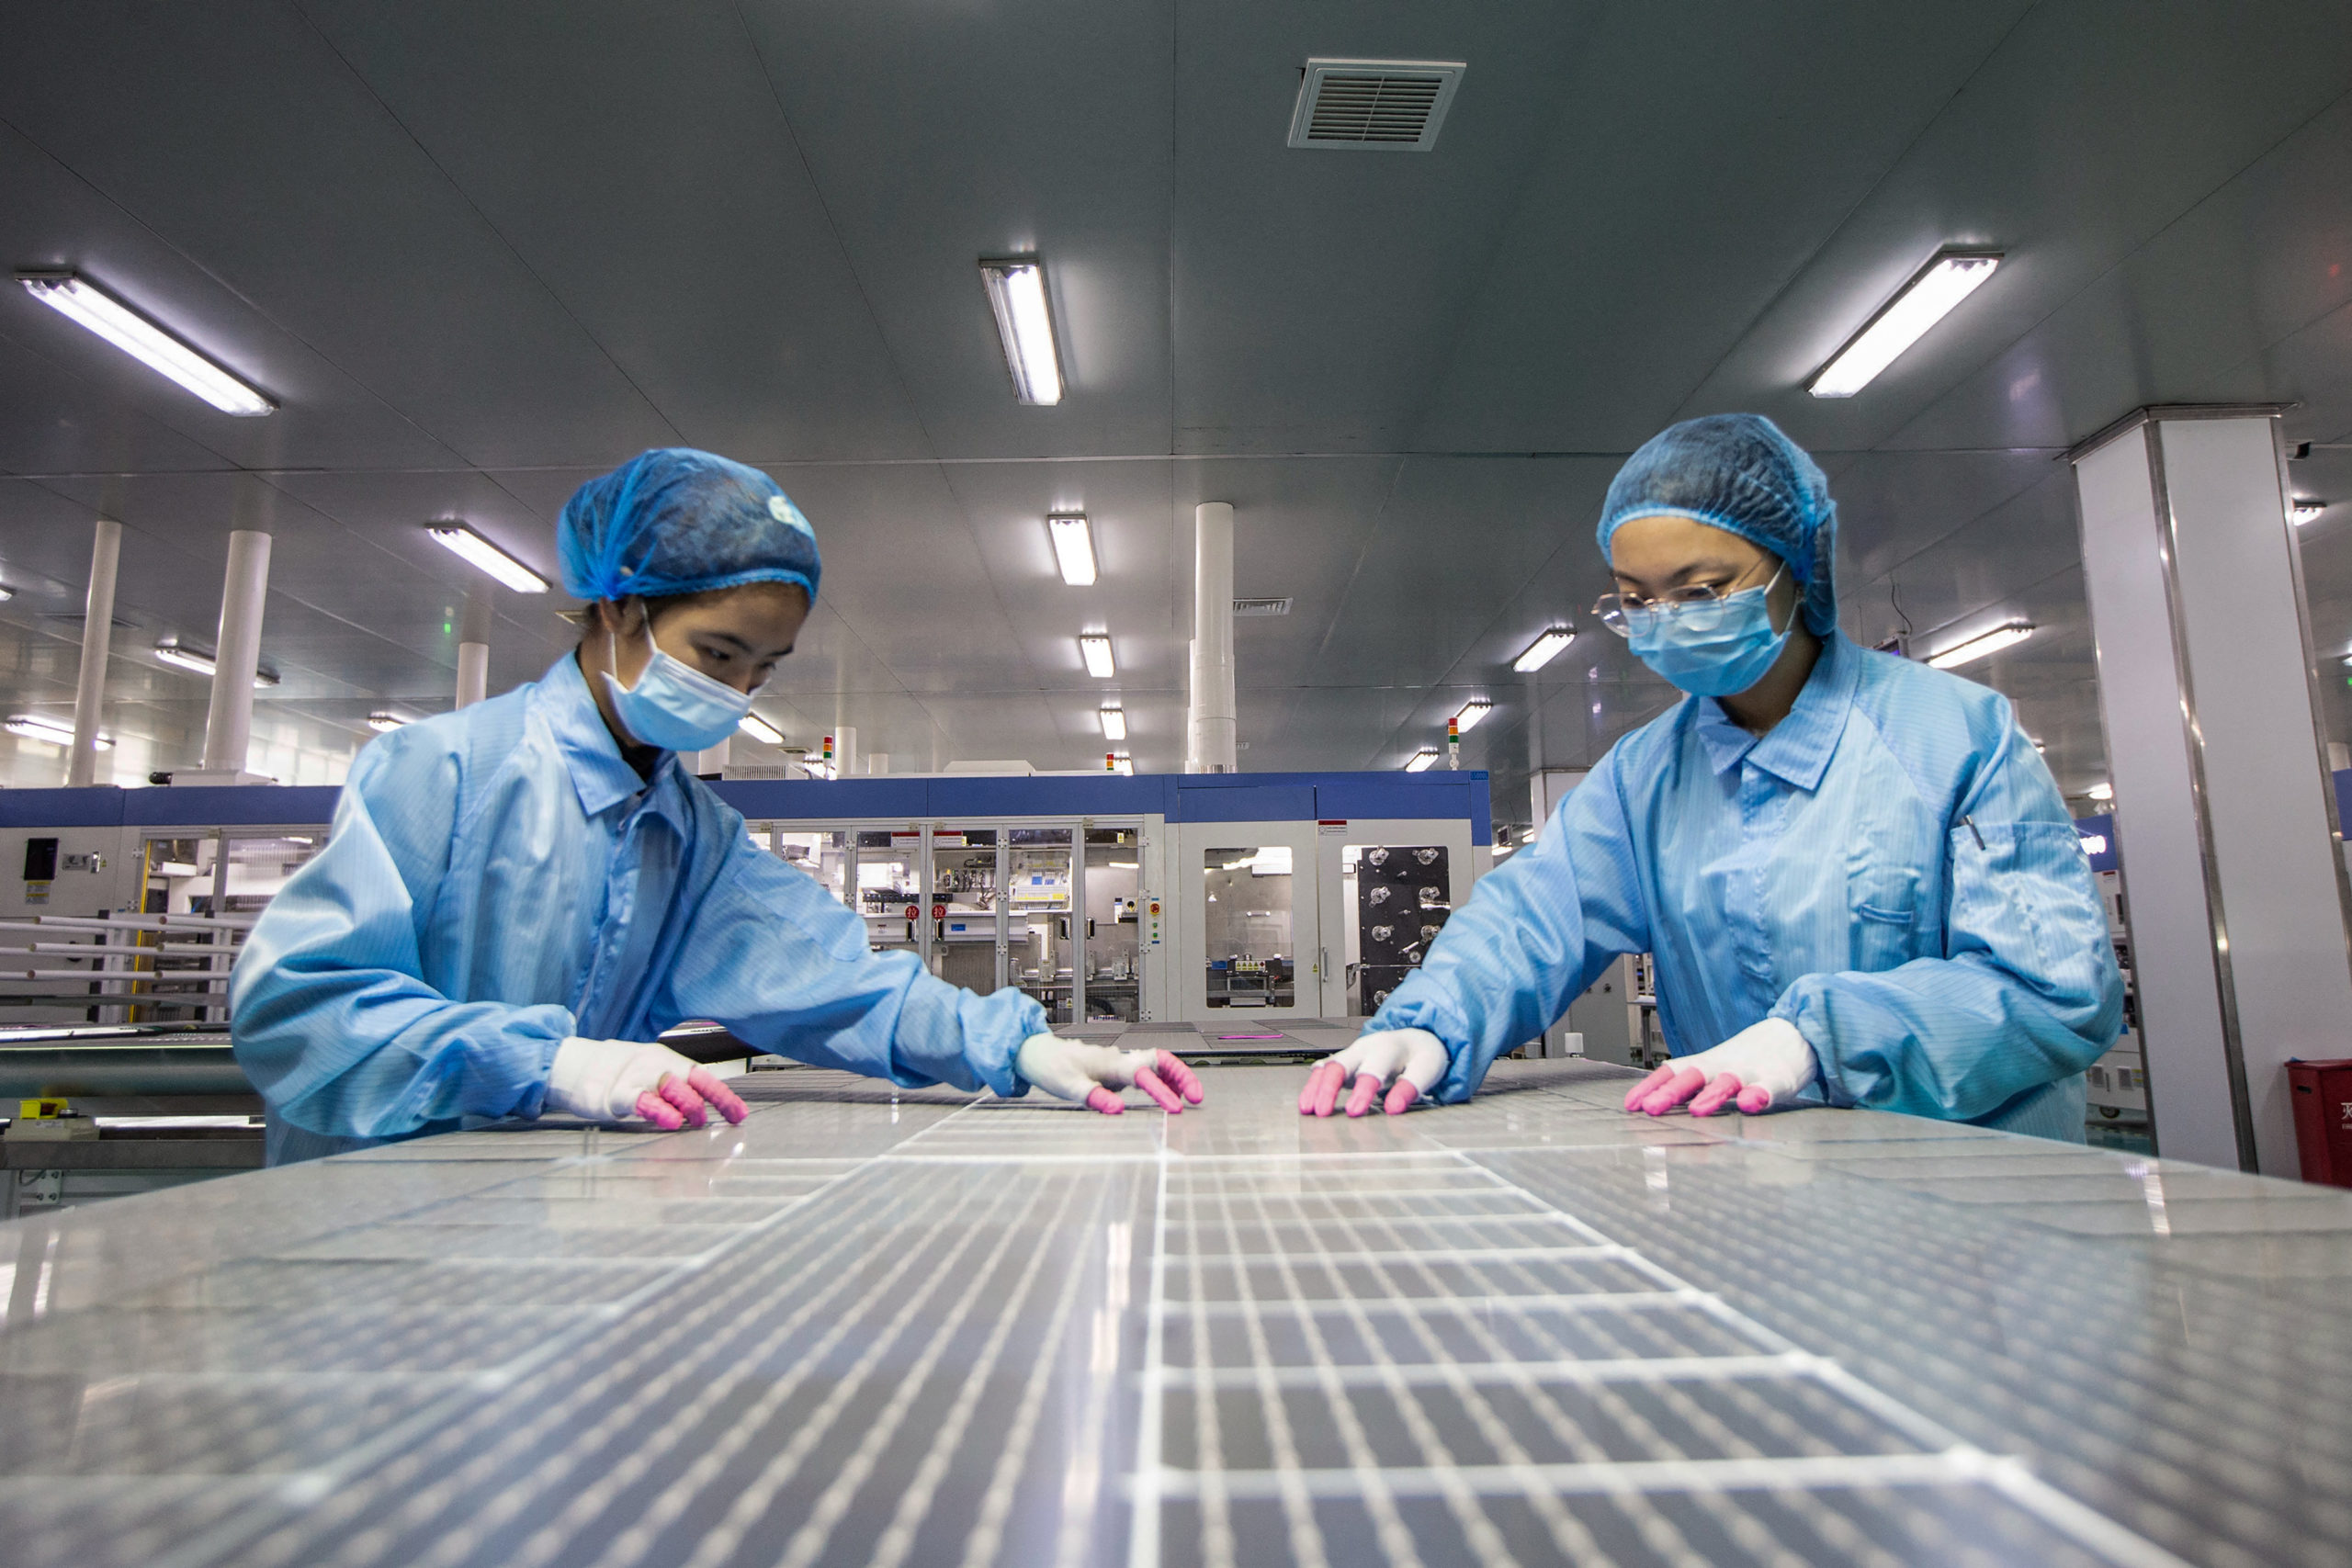 Employees work on solar modules at a factory in Haian in China's eastern Jiangsu province on Nov. 15. (STR/AFP via Getty Images)